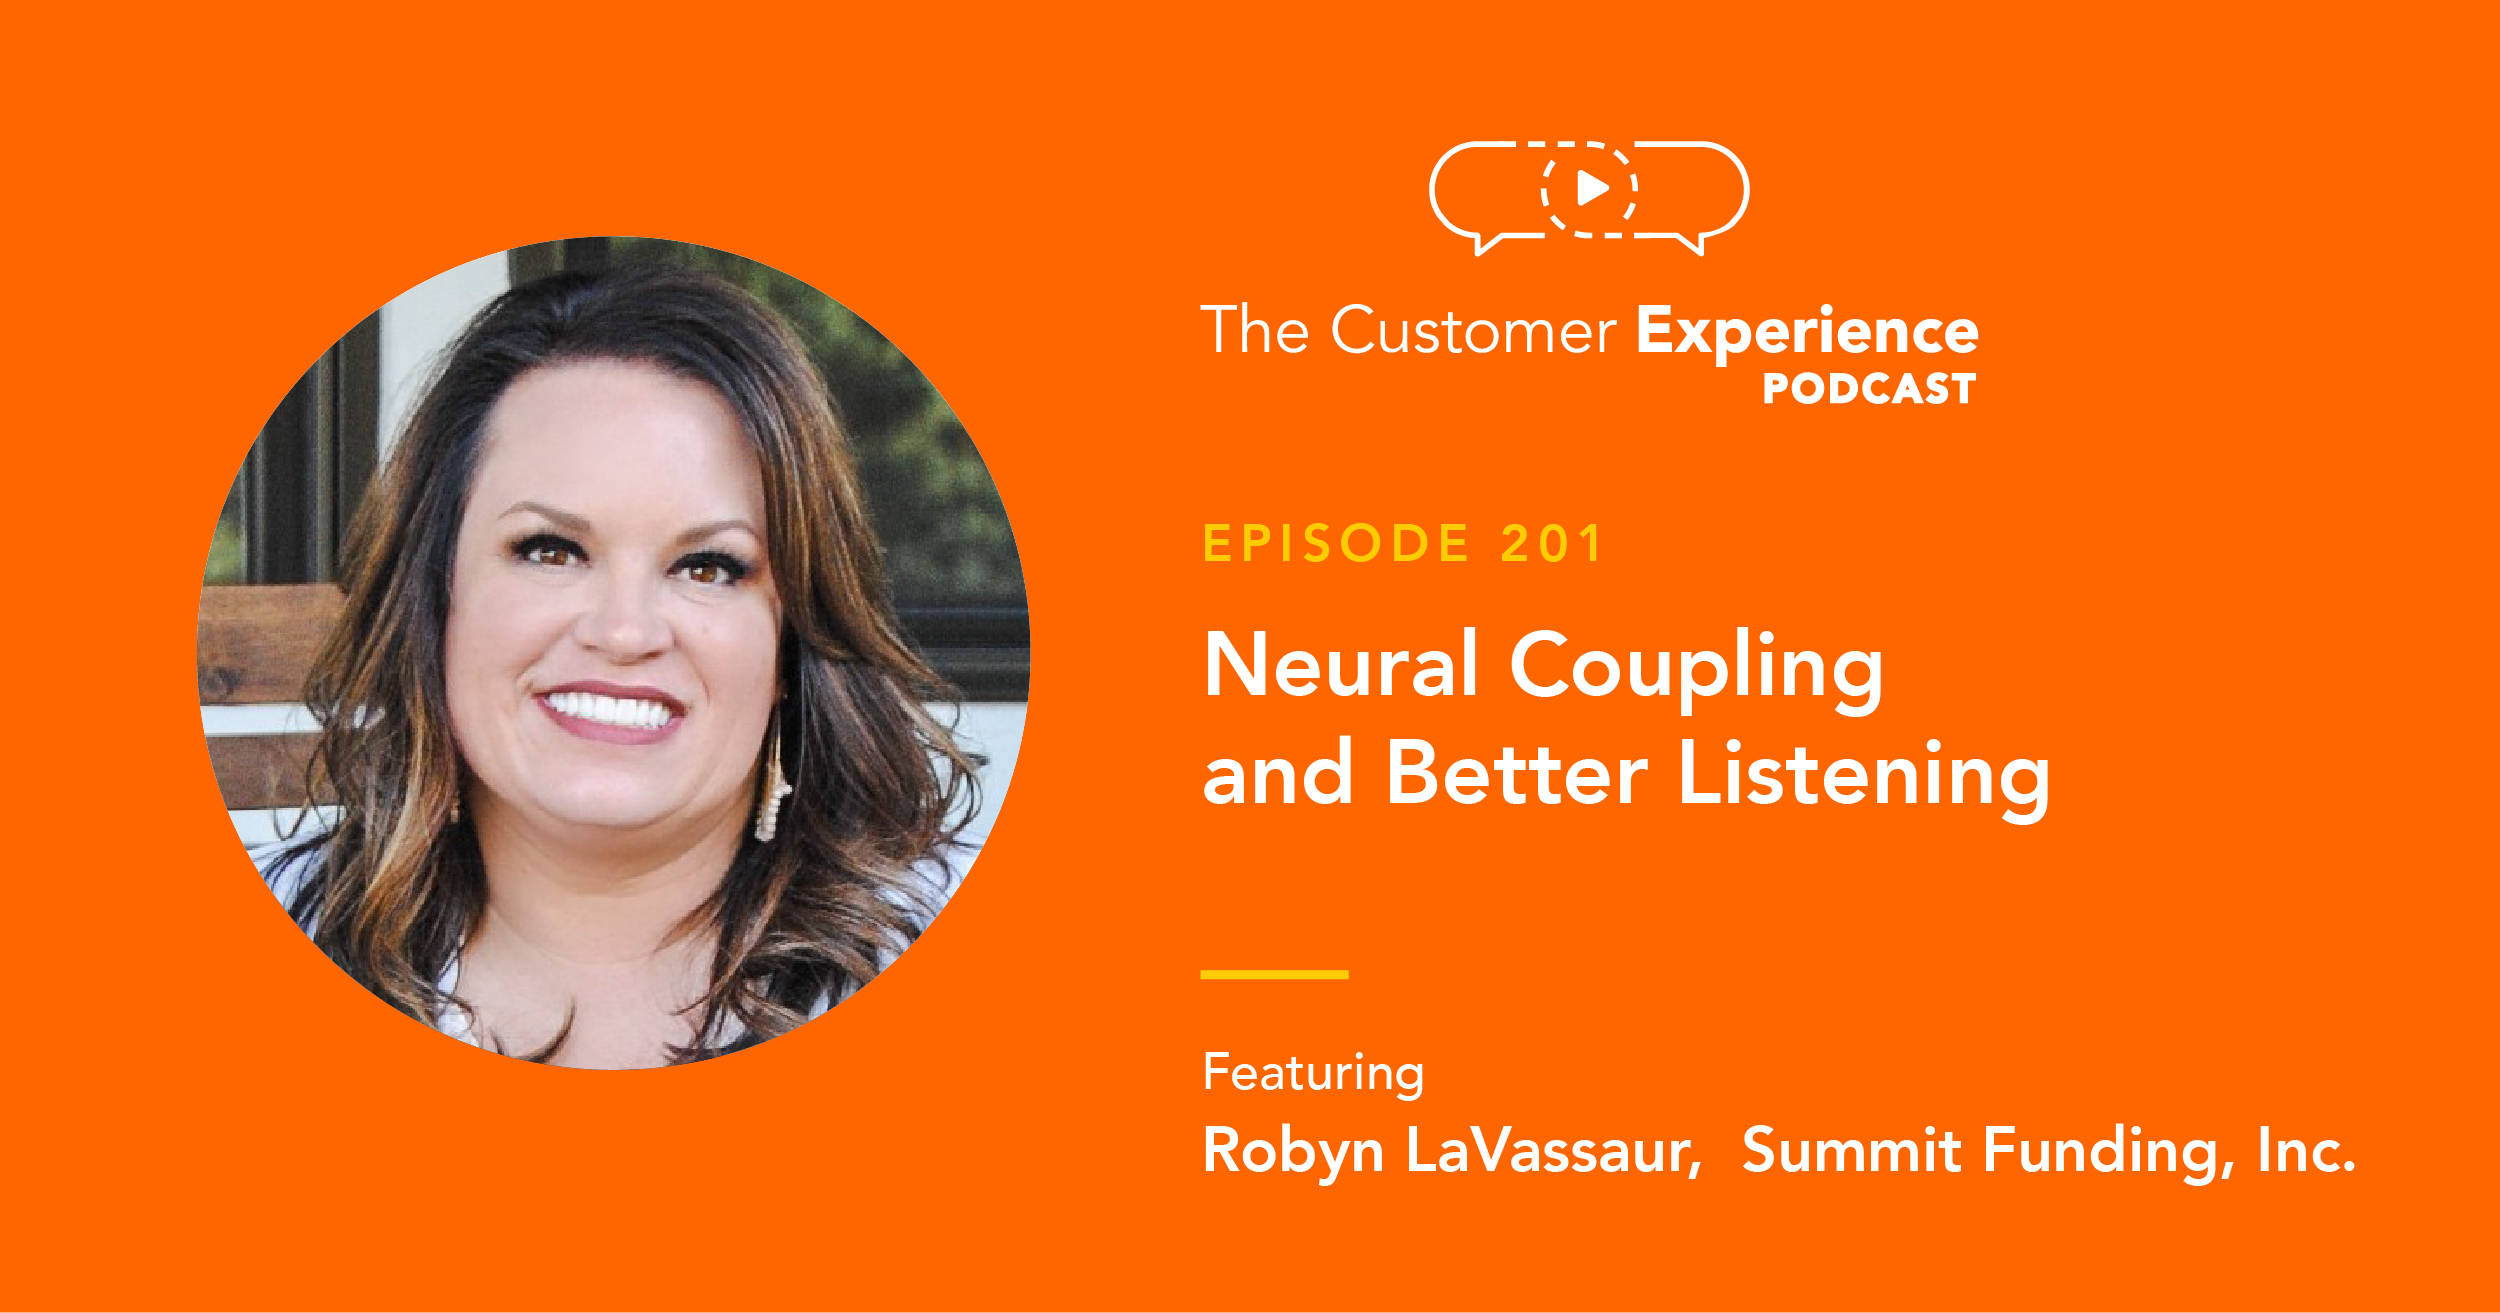 Robyn LaVassaur, Summit Funding, The Customer Experience Podcast, Oregon, mortgage, lender, loan officer, leadership, management, coaching, training, mentoring